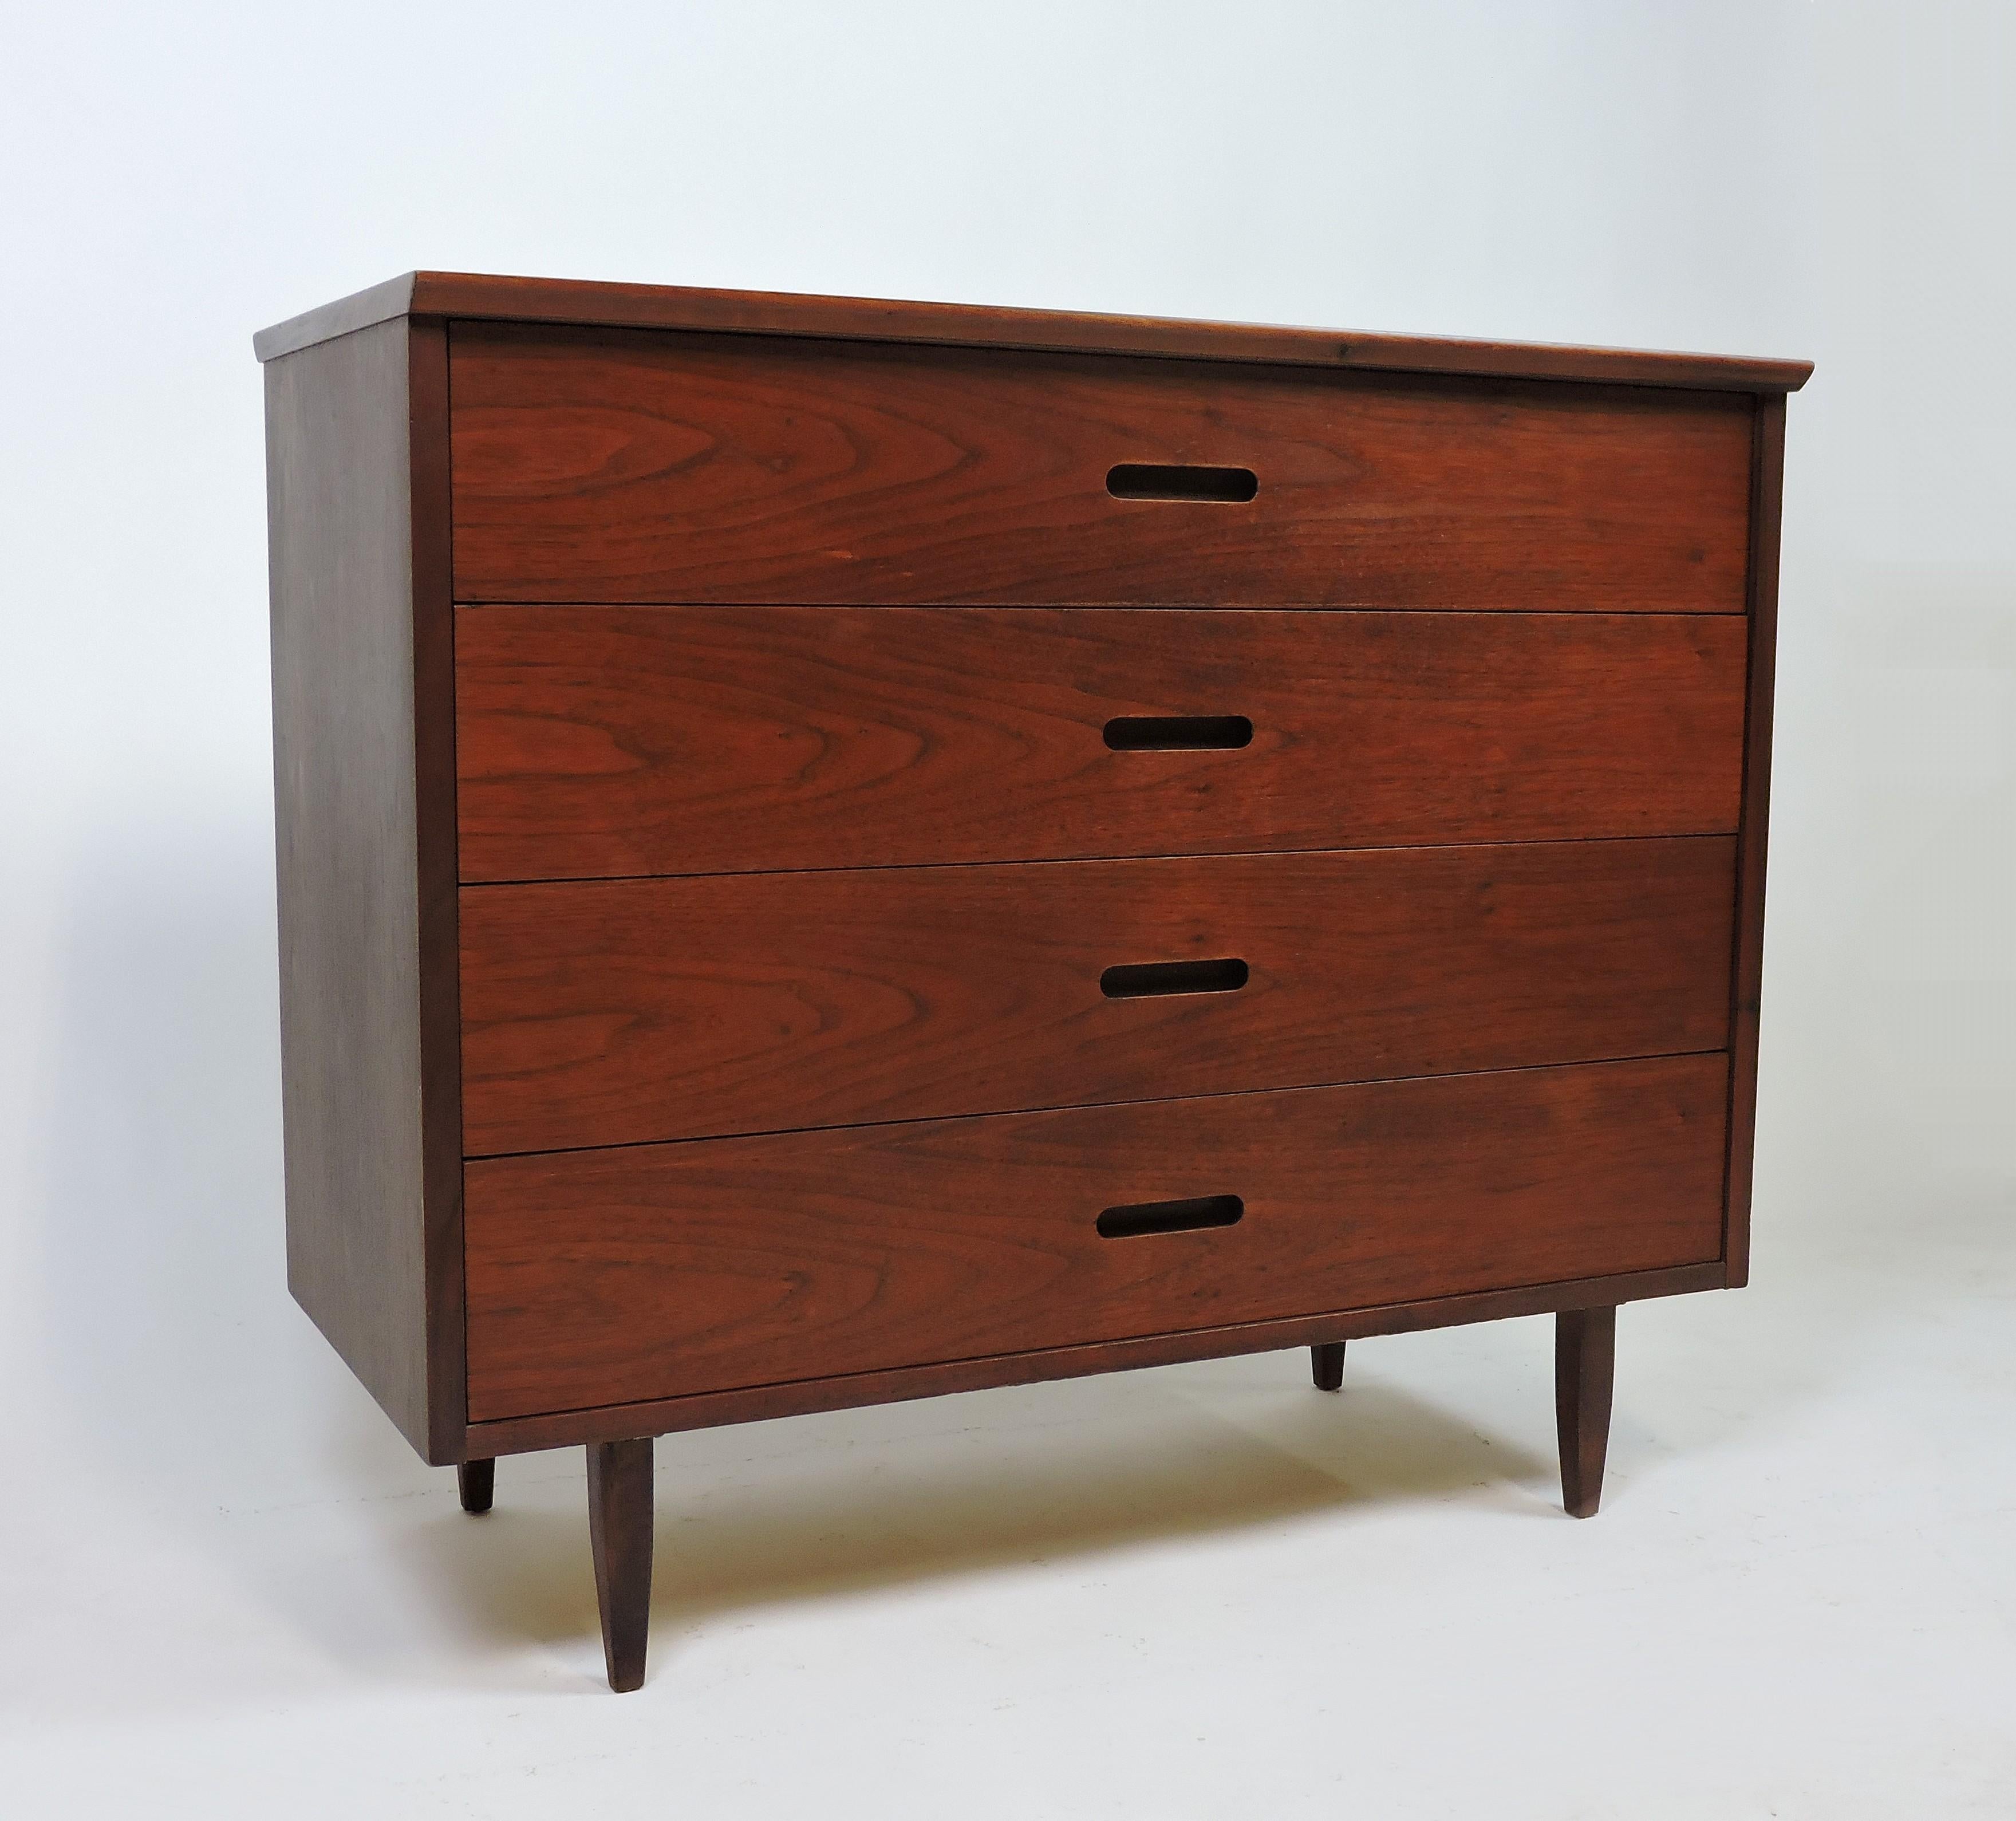 Handsome walnut dresser designed by Jack Cartwright and manufactured by Founders Furniture Company. This cabinet has beautiful wood grain and four drawers with Minimalist Scandinavian style inset pulls.


   